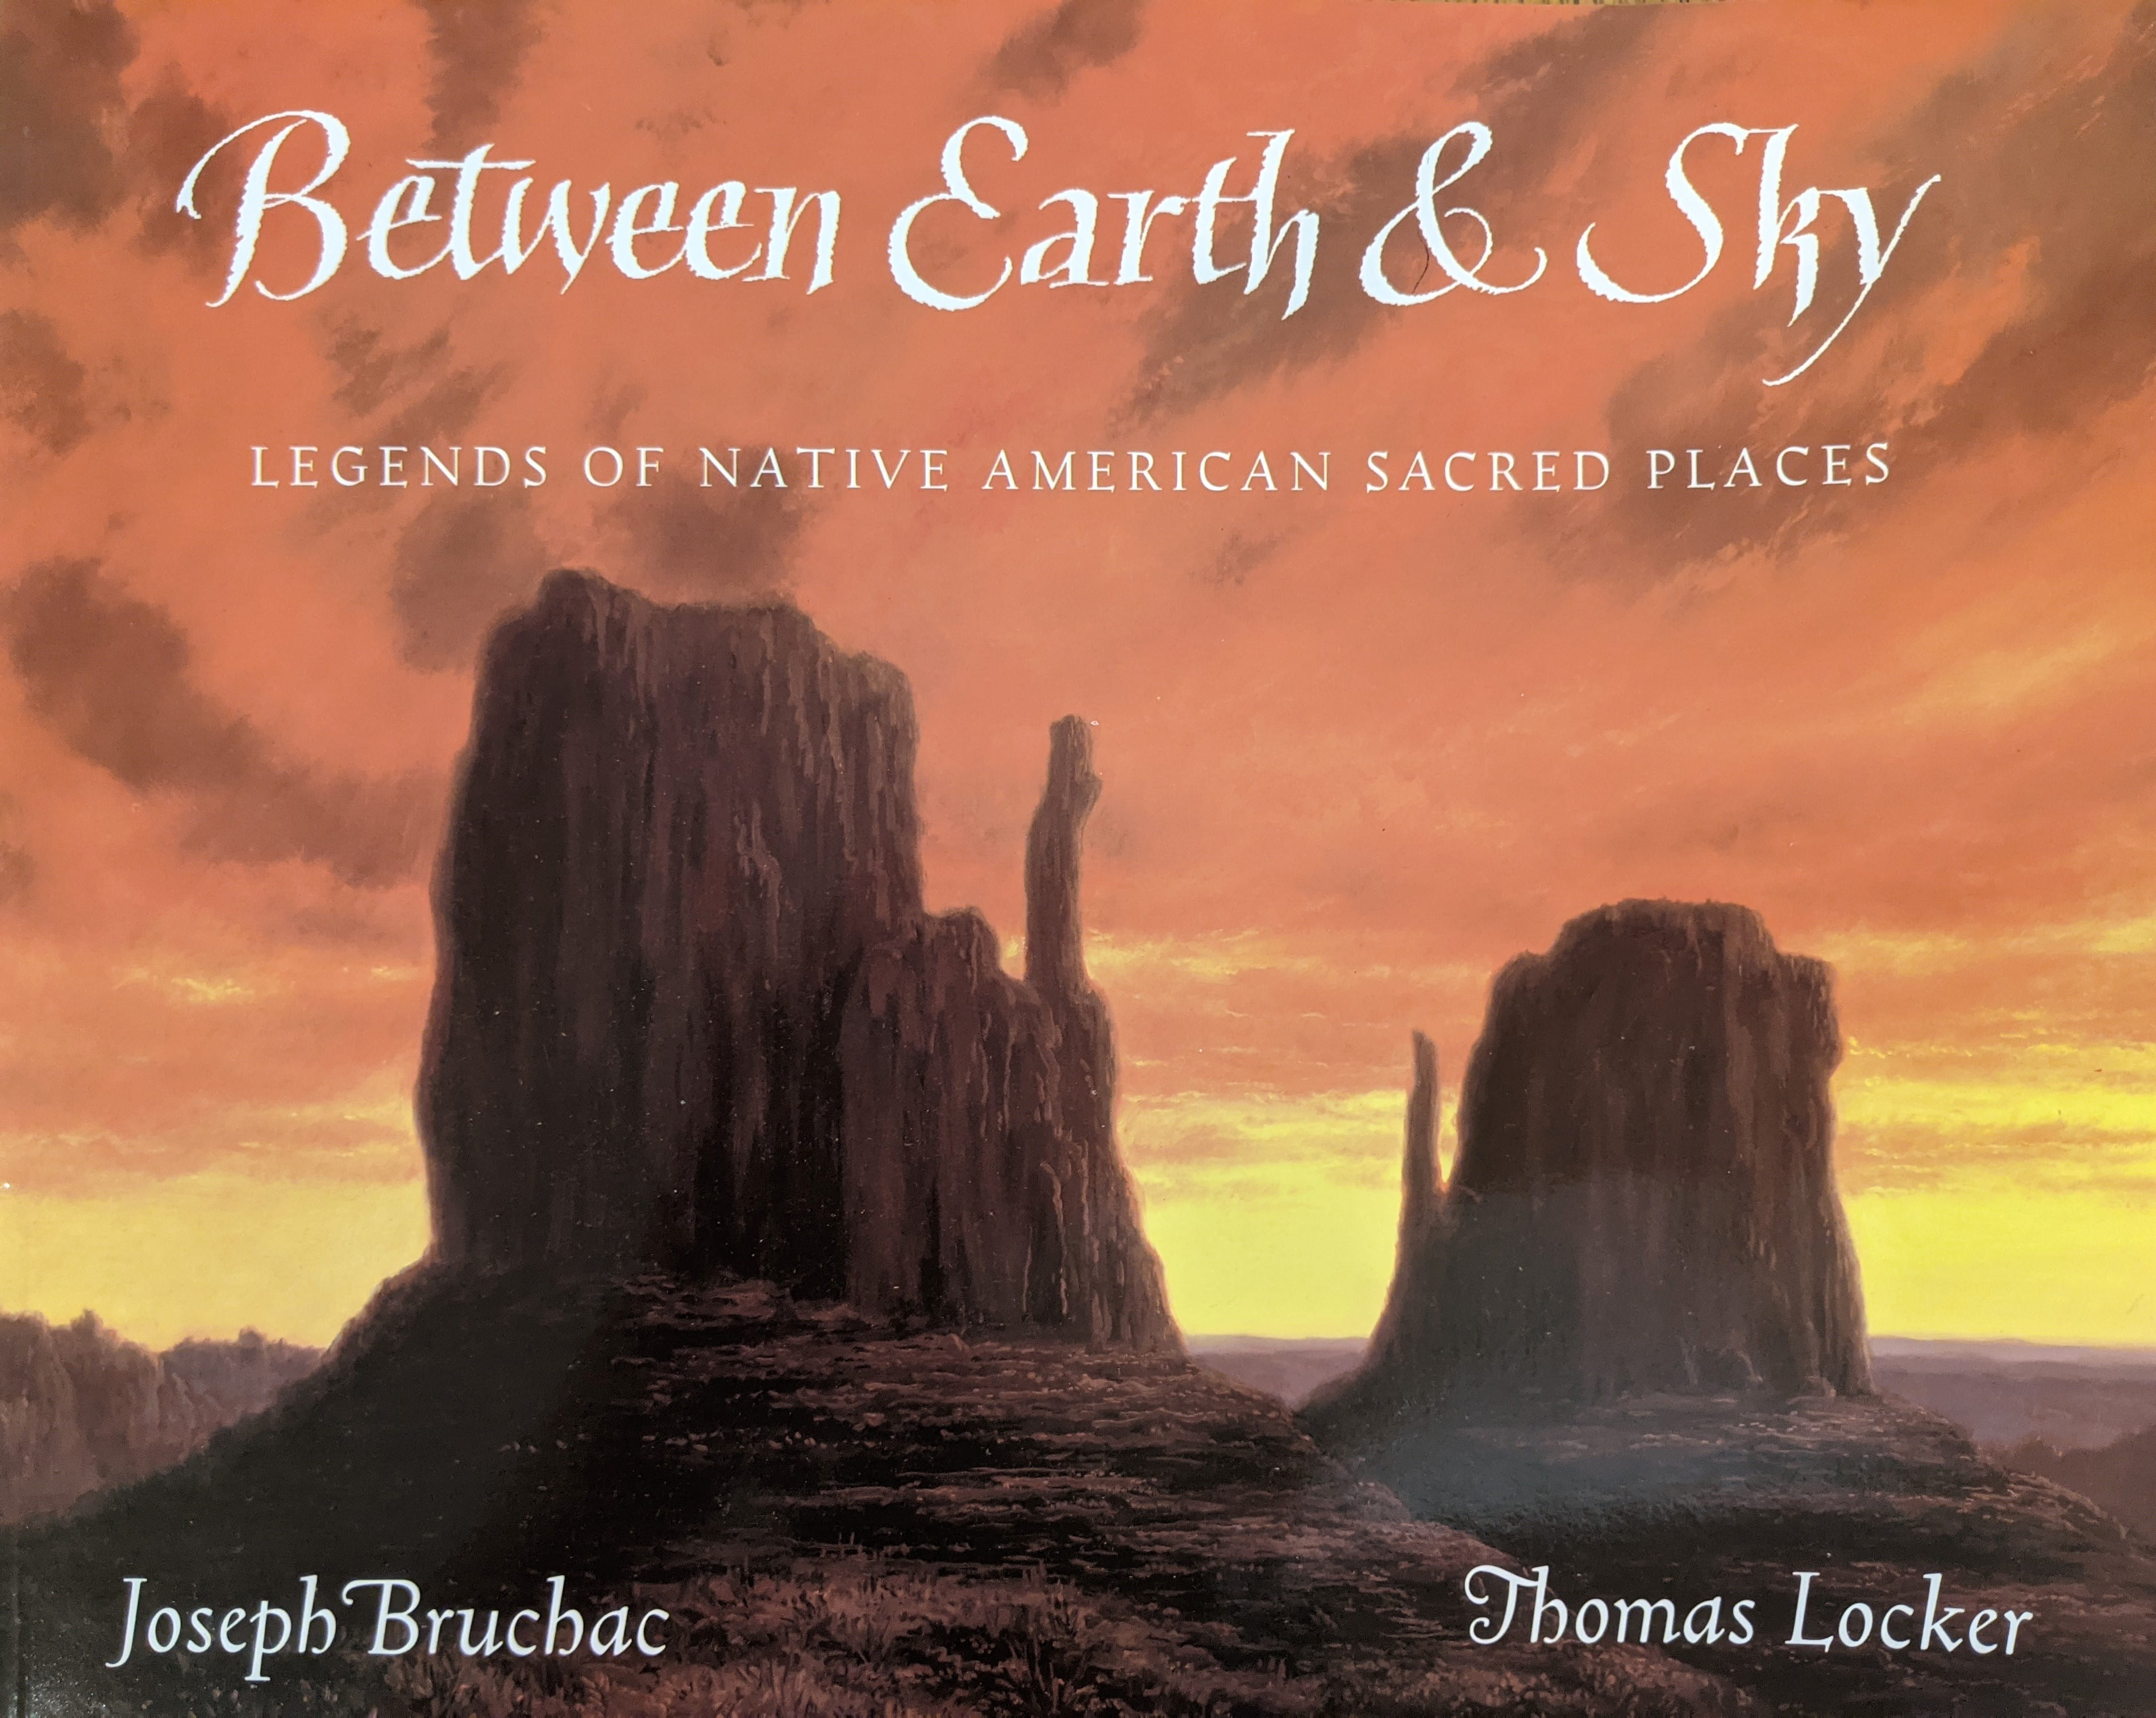 Cover of Between Earth & Sky by Joseph Bruchac, illustrated by Thomas Locker